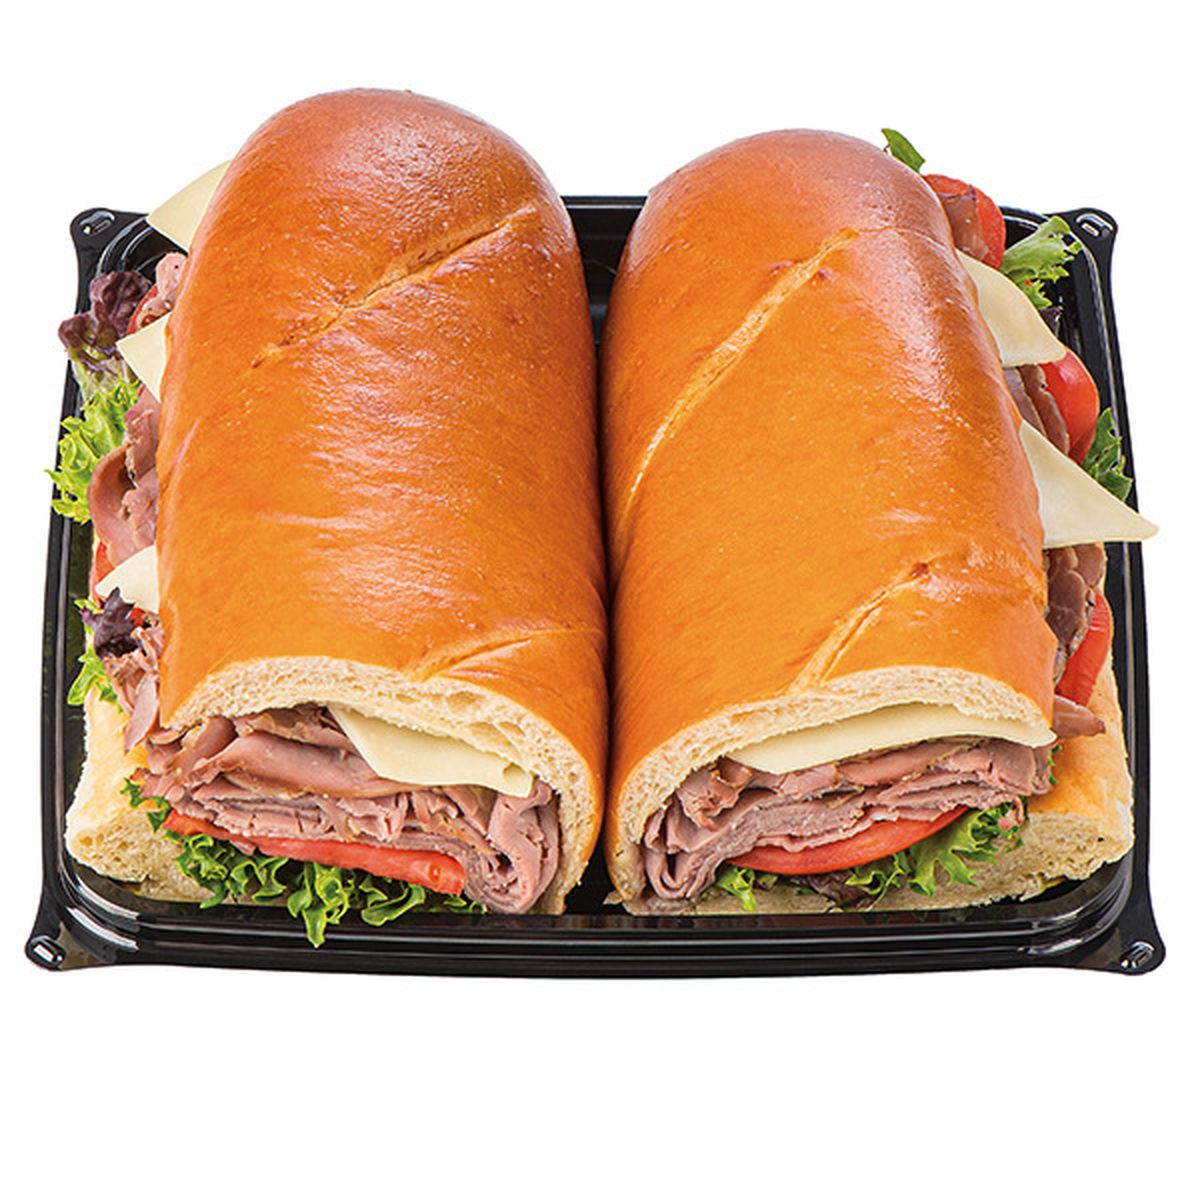 Calories in Wegmans Roast Beef with Provolone Large Packaged Sub